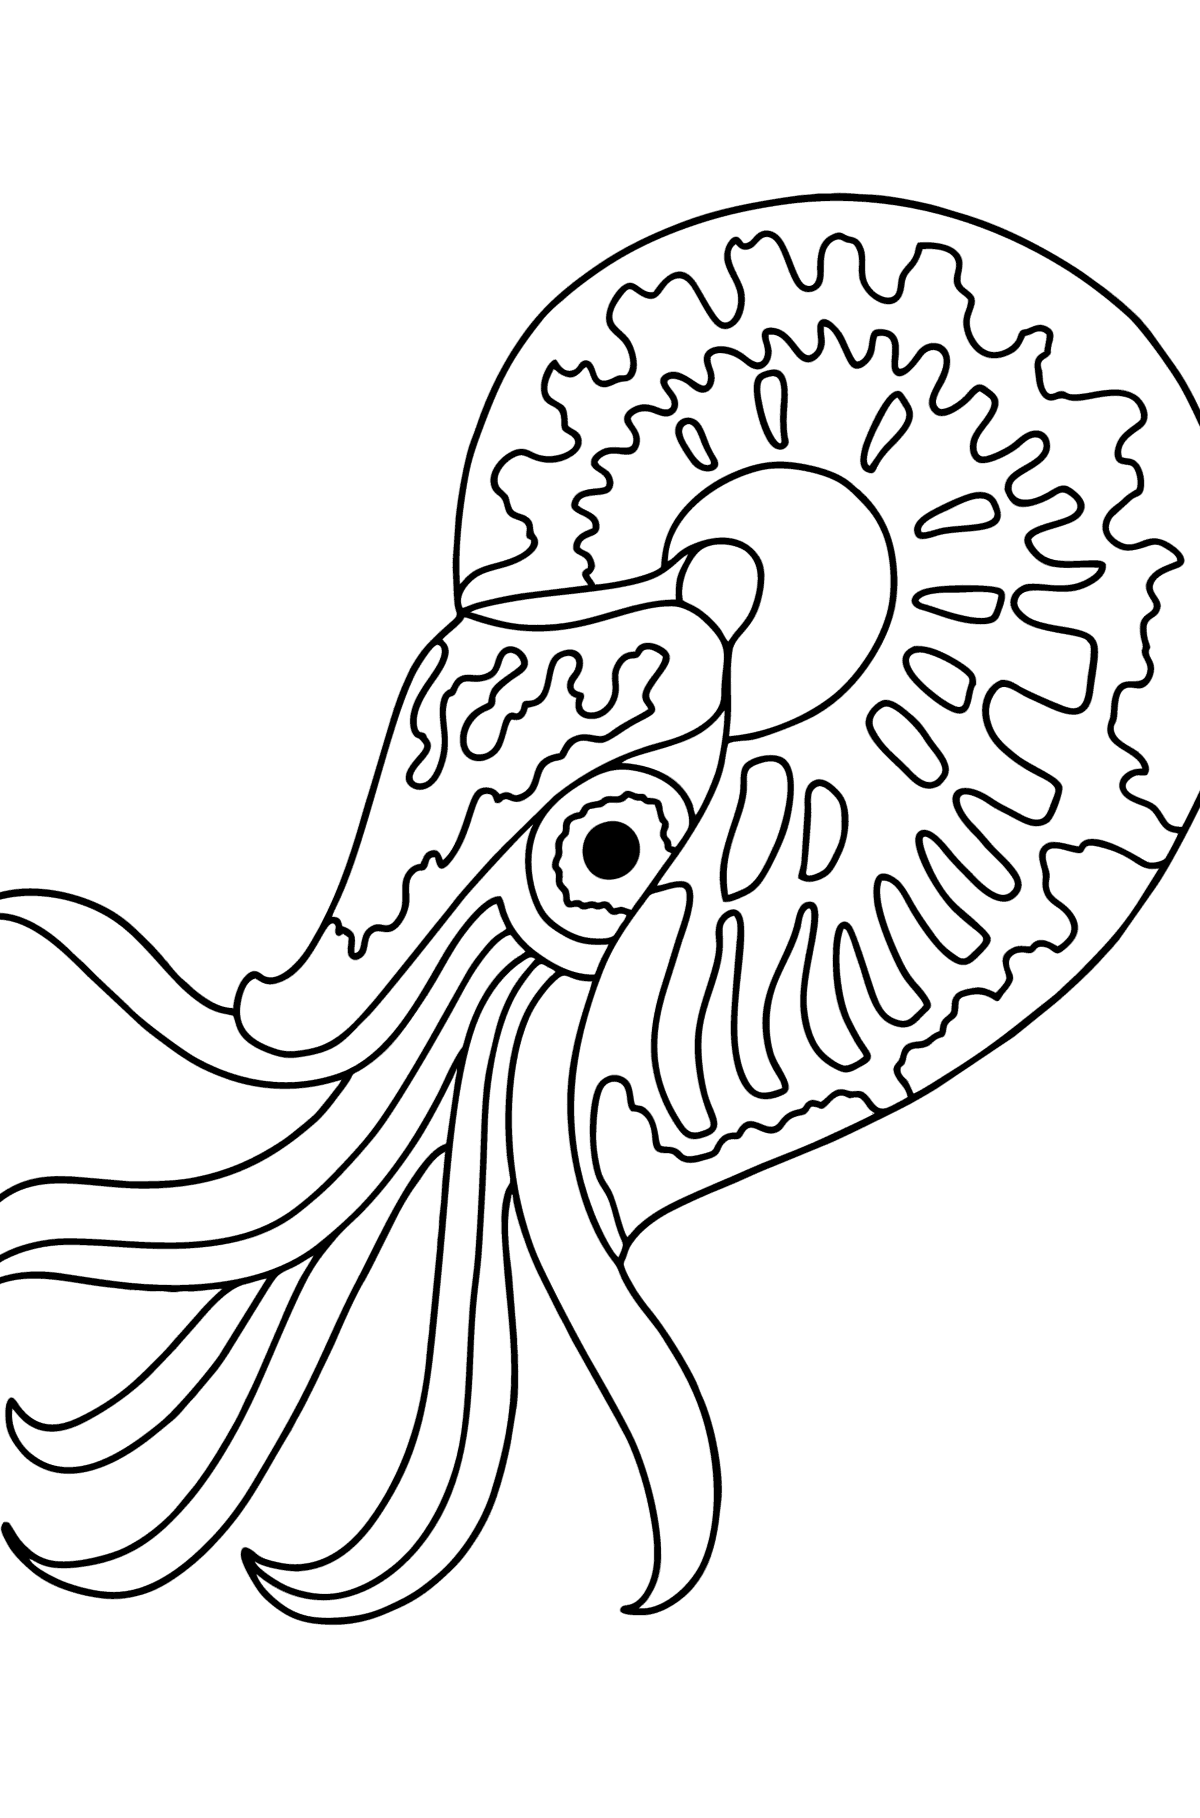 Nautilus coloring page - Coloring Pages for Kids